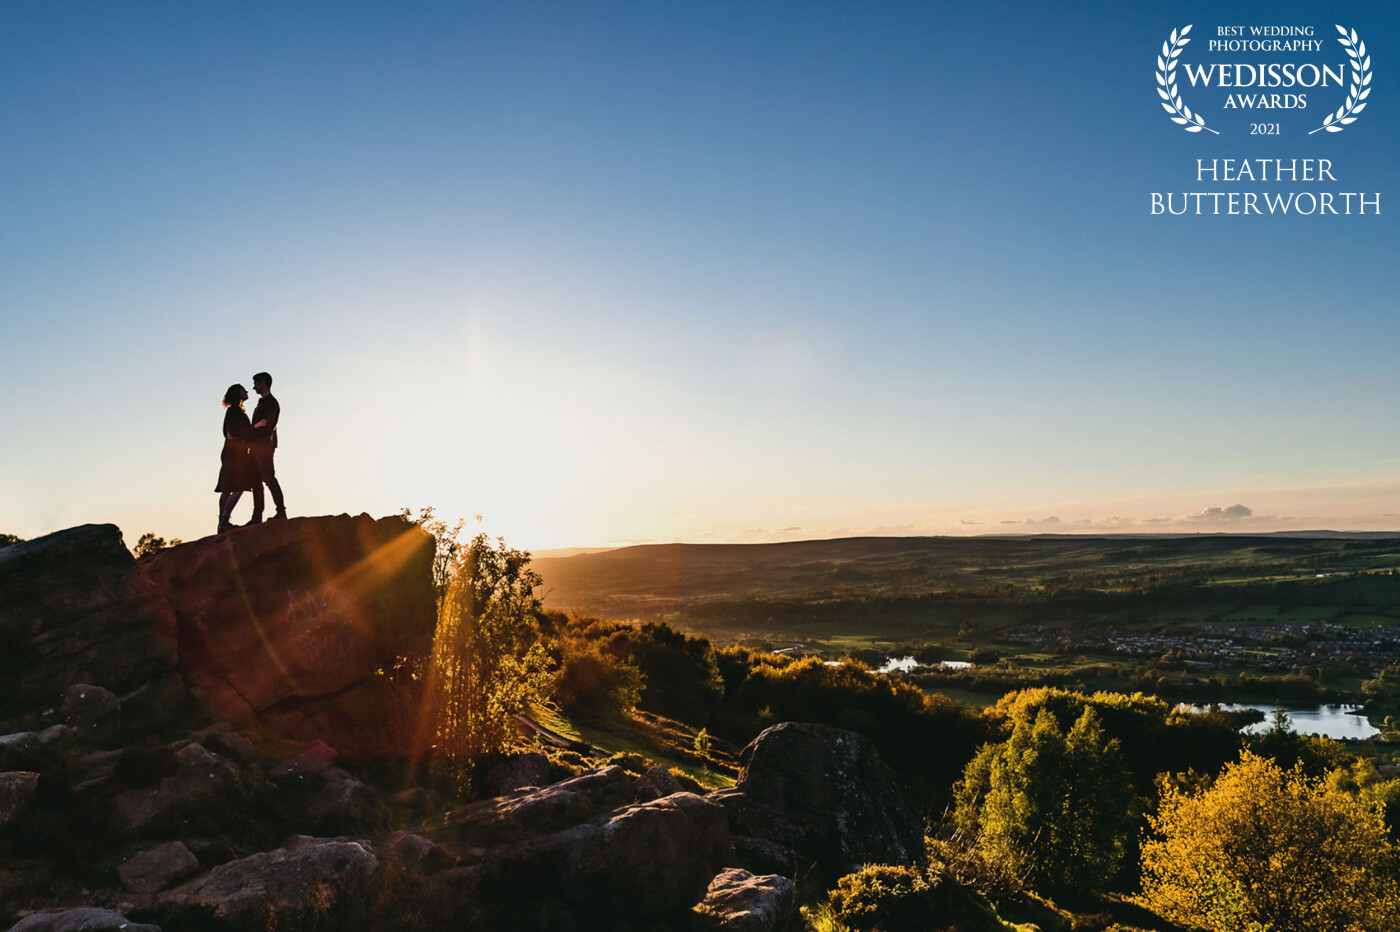 The lovely Jess and Oli on their pre-wedding shoot at Otley Chevin Forest Park. We had had days of rain and we'd postponed our photo session the week before due to the horrendous weather. I'm really glad that we did though as we ended up with this perfect sunset overlooking Otley.